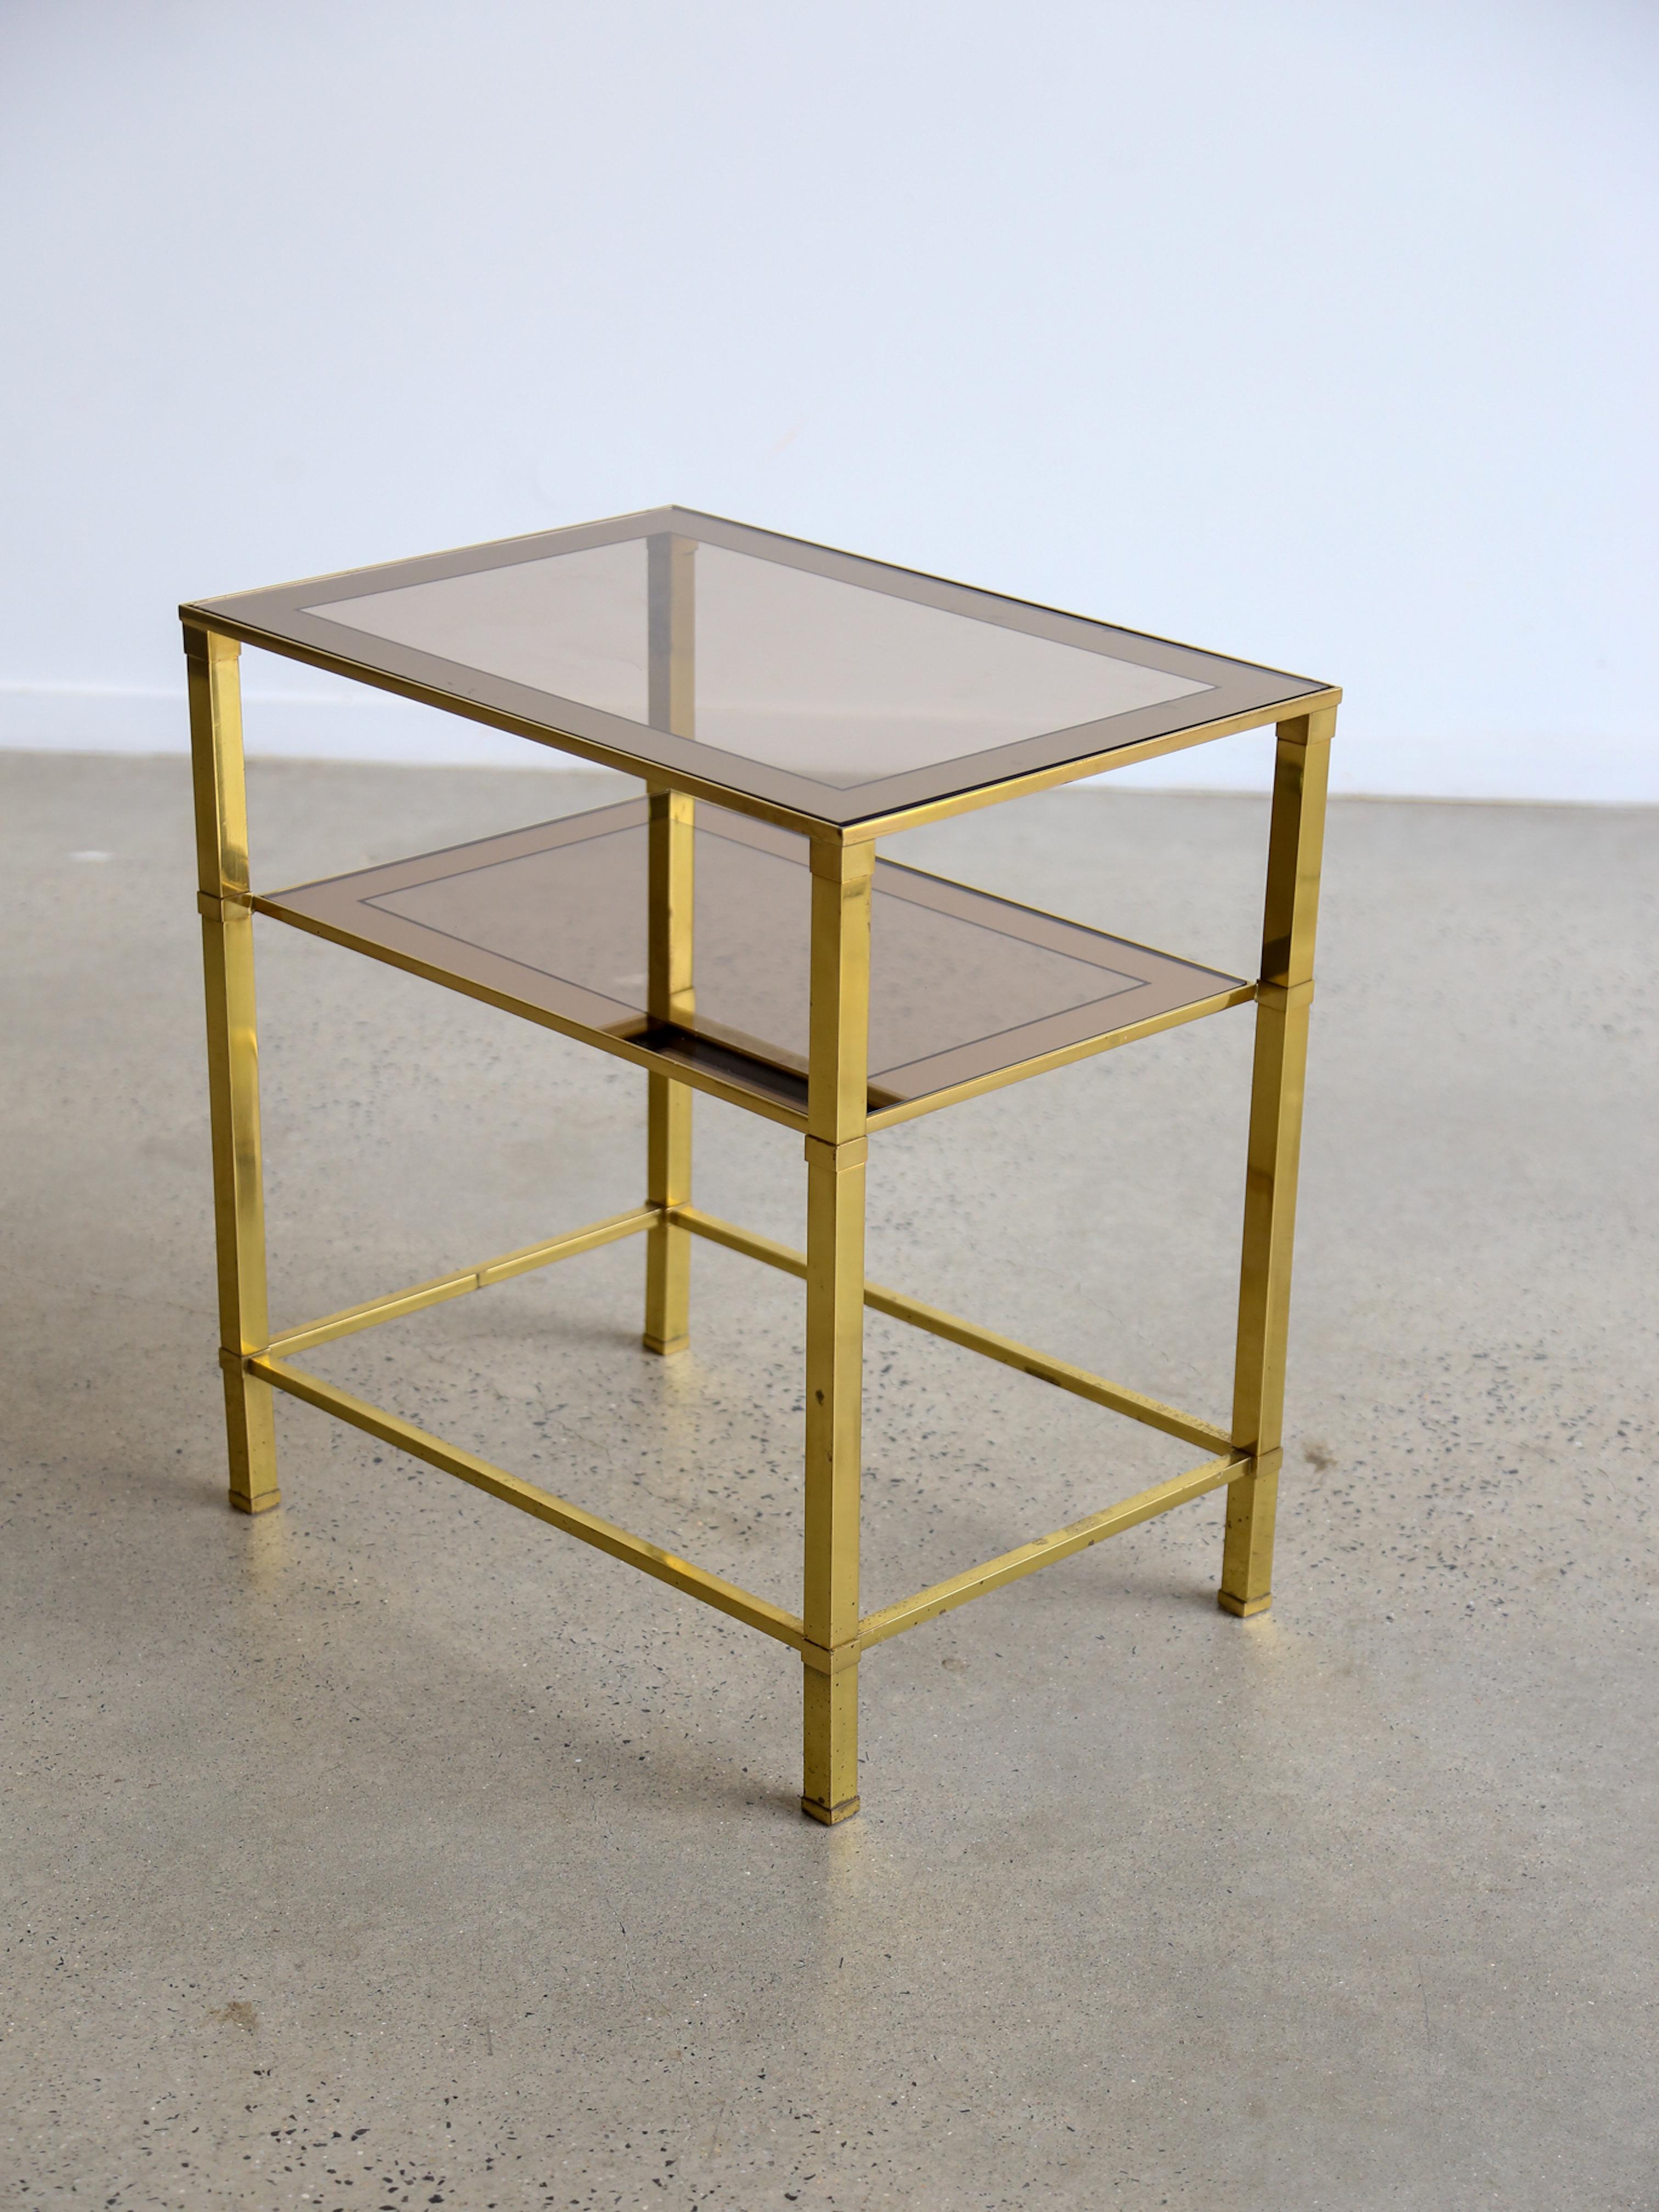 Romeo Rega Italian Mid Century Modern rectangular Brass side table with two smoked glass shelves.

Romeo Rega (1932-1975) was an Italian furniture and lighting designer known for his work in the mid-20th century. He was associated with the modernist